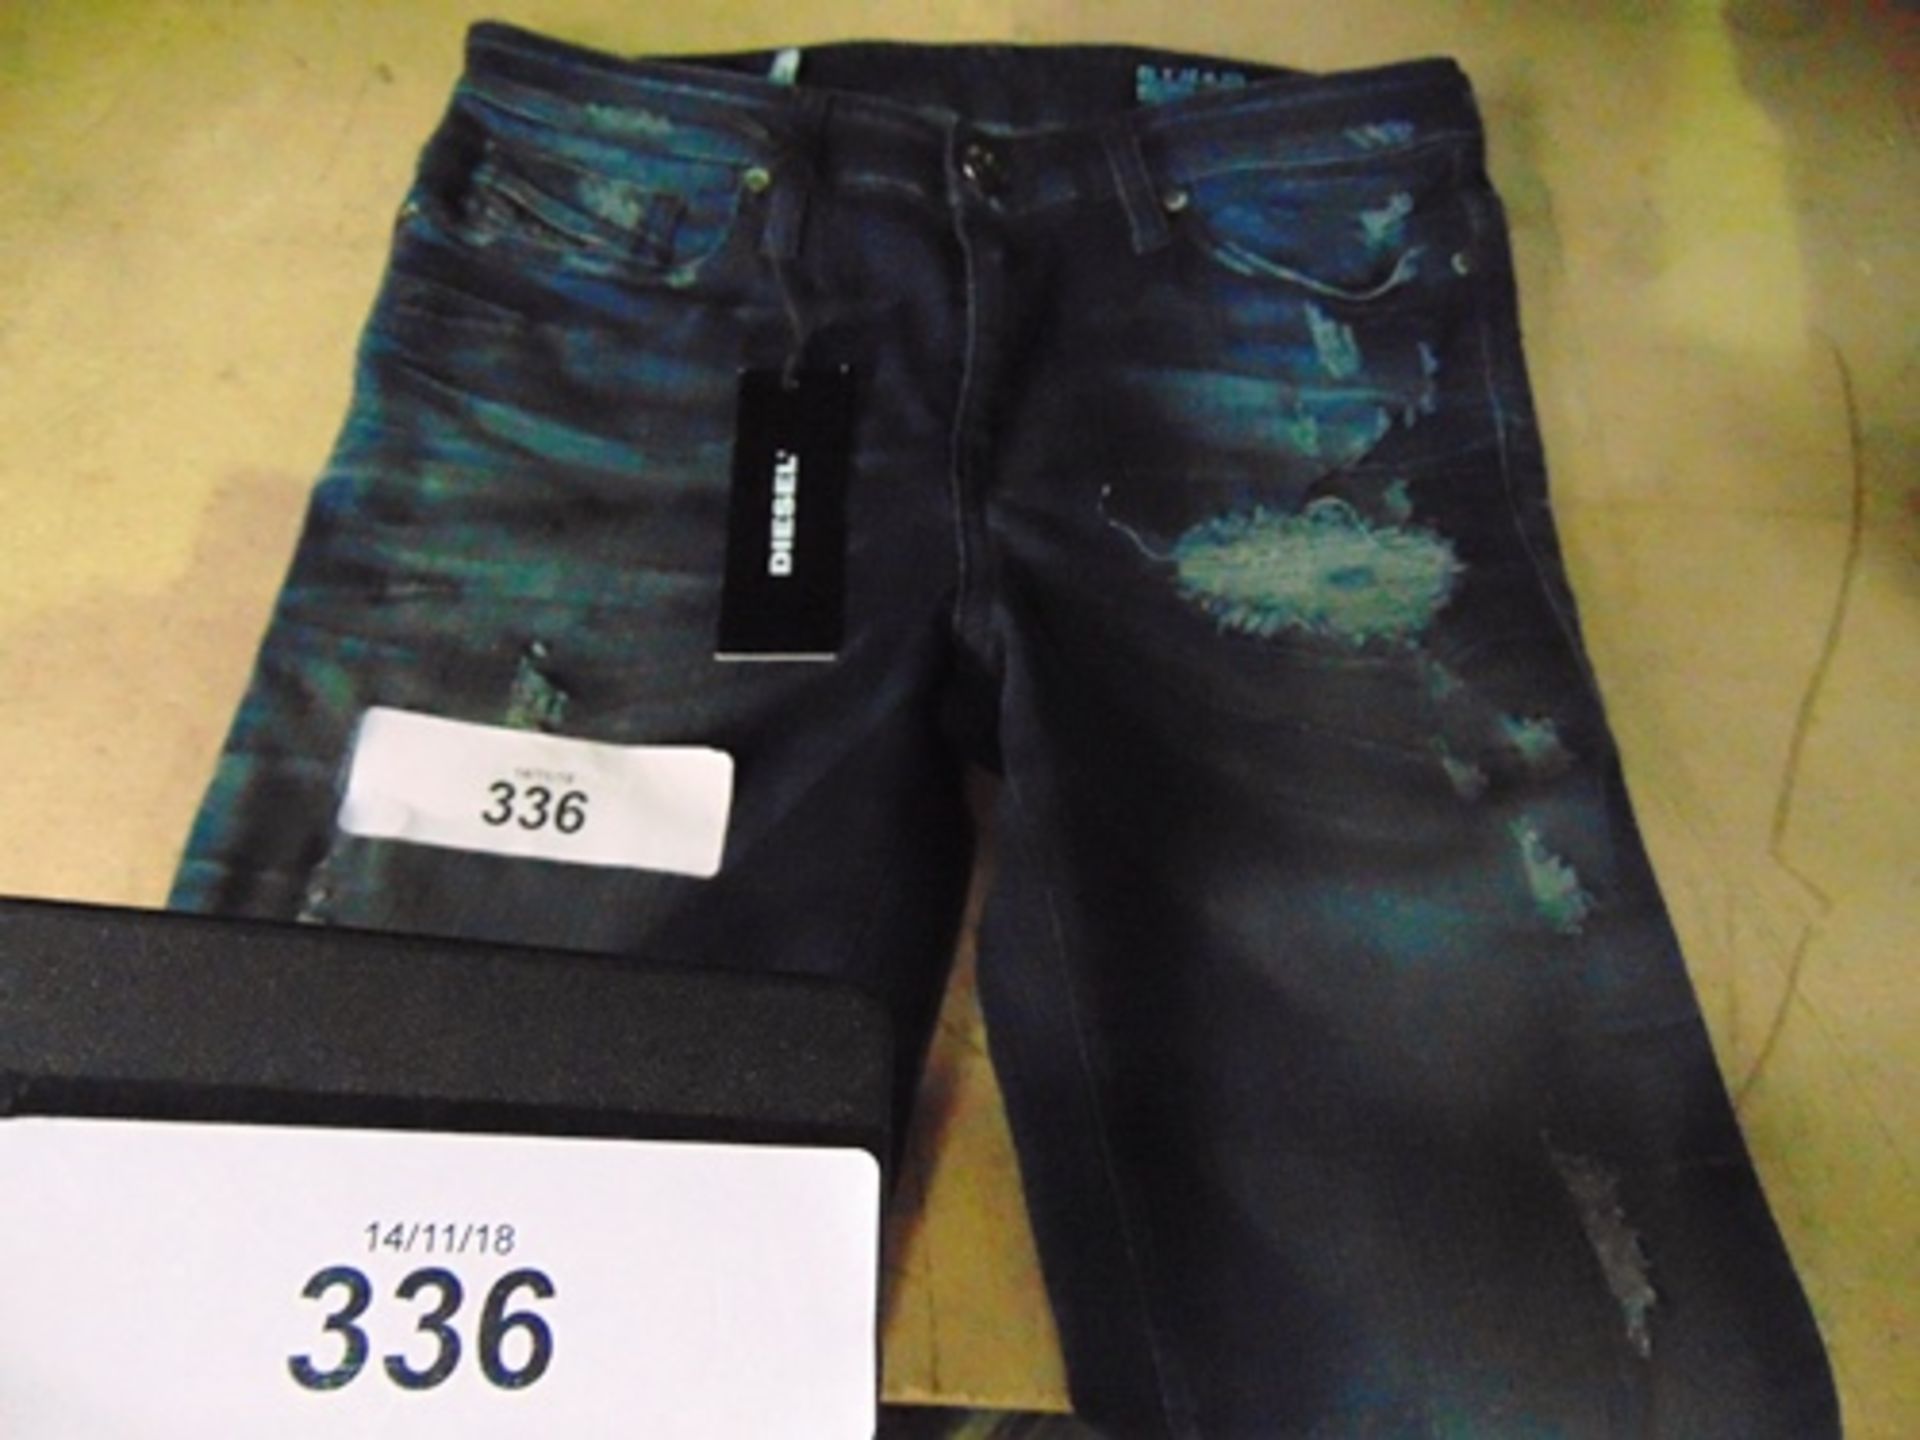 1 x pair of Diesel skinzee L32 trousers, size 27, length 32, RRP £140.00 - New with tags (CC2)